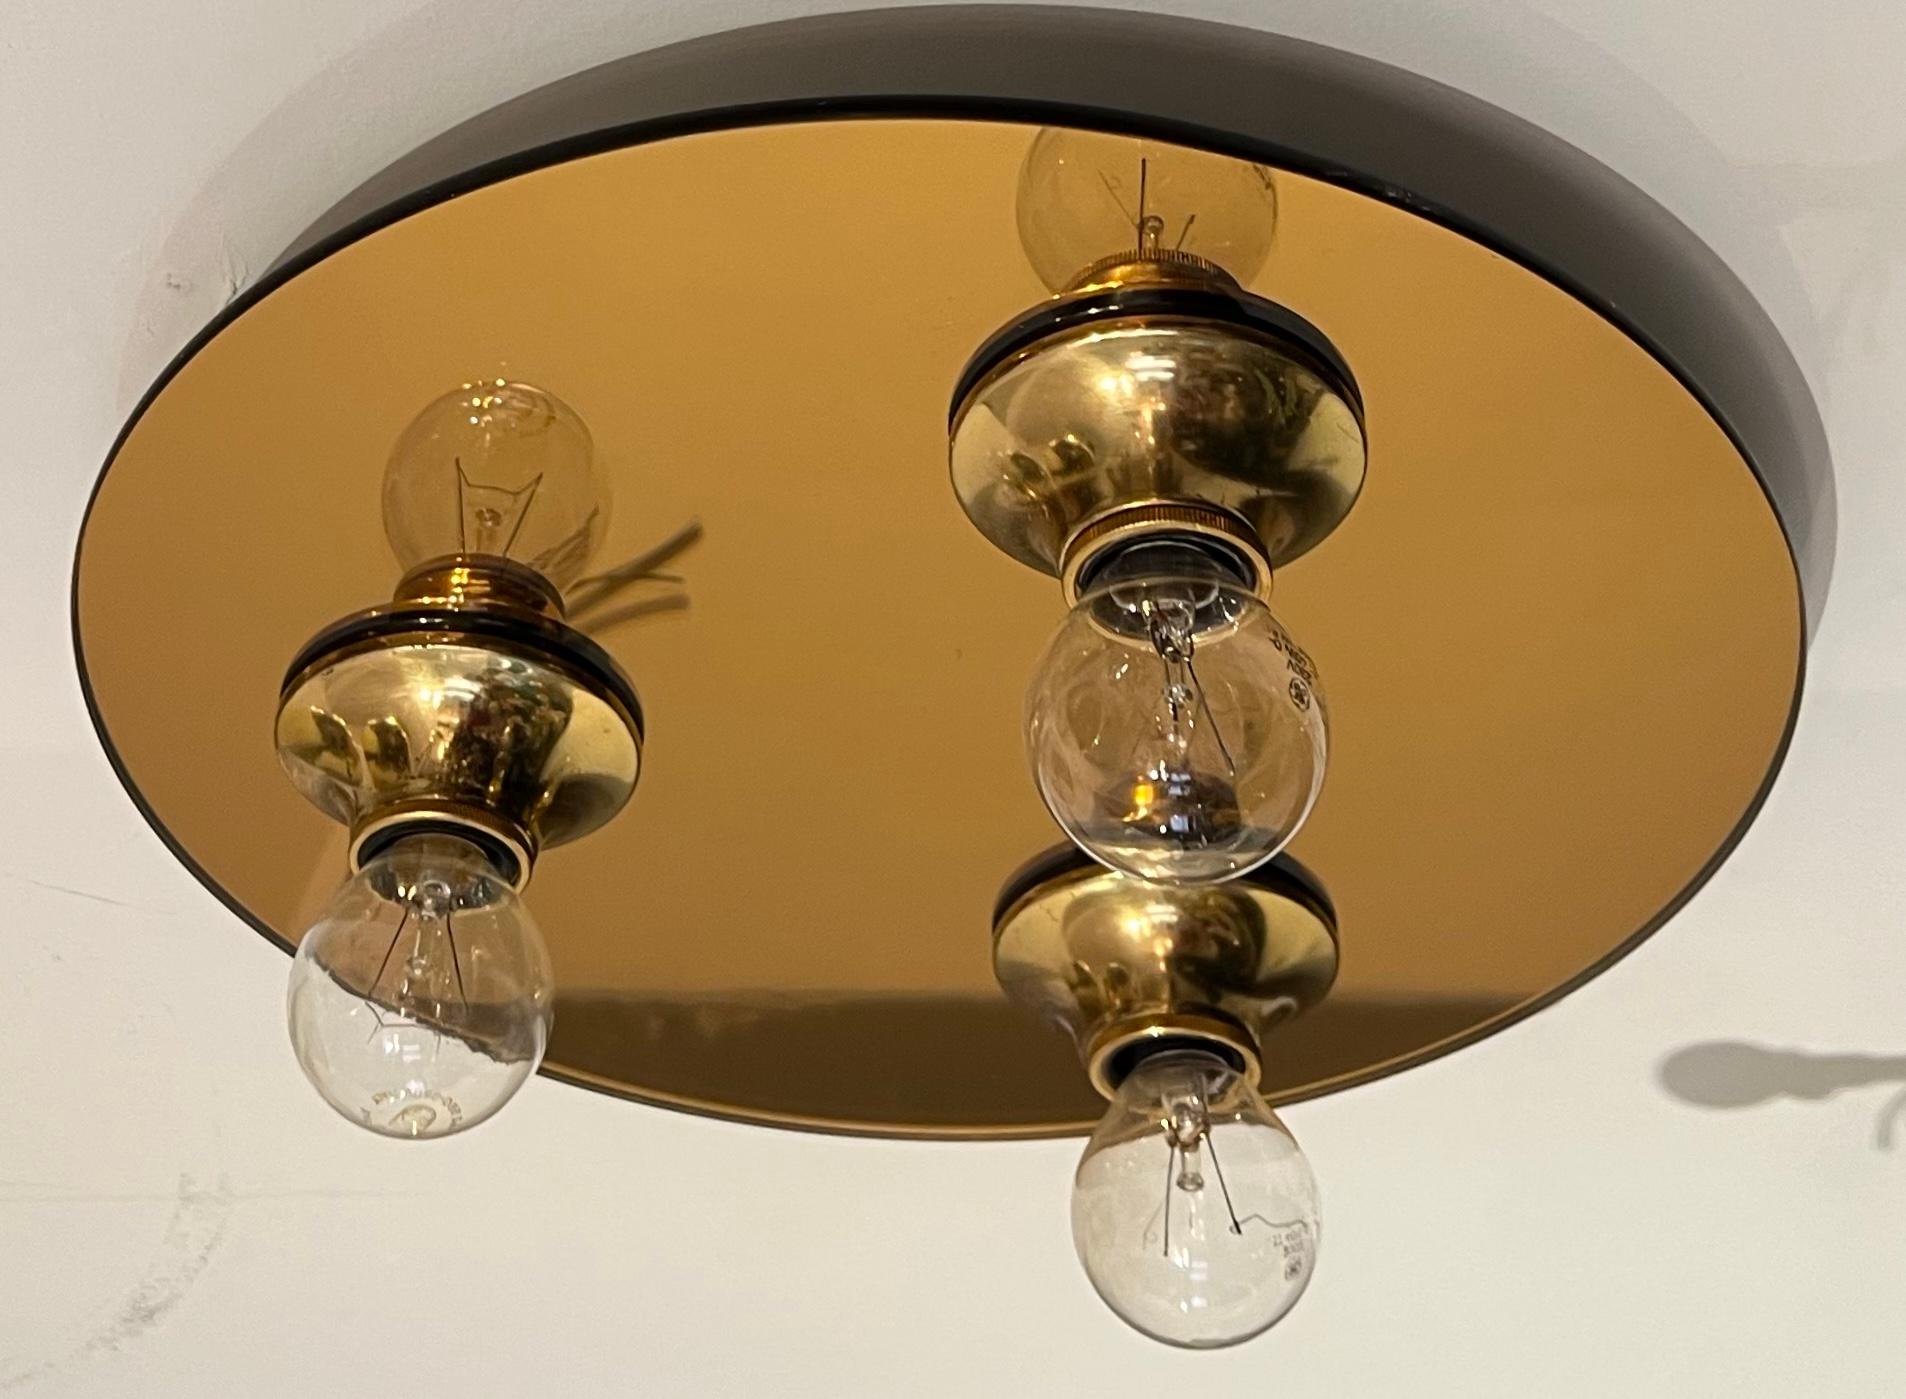 A spectacular pair of high style 1970s copper/bronze mirrored round flush lights with gold space age sockets. Rewired.